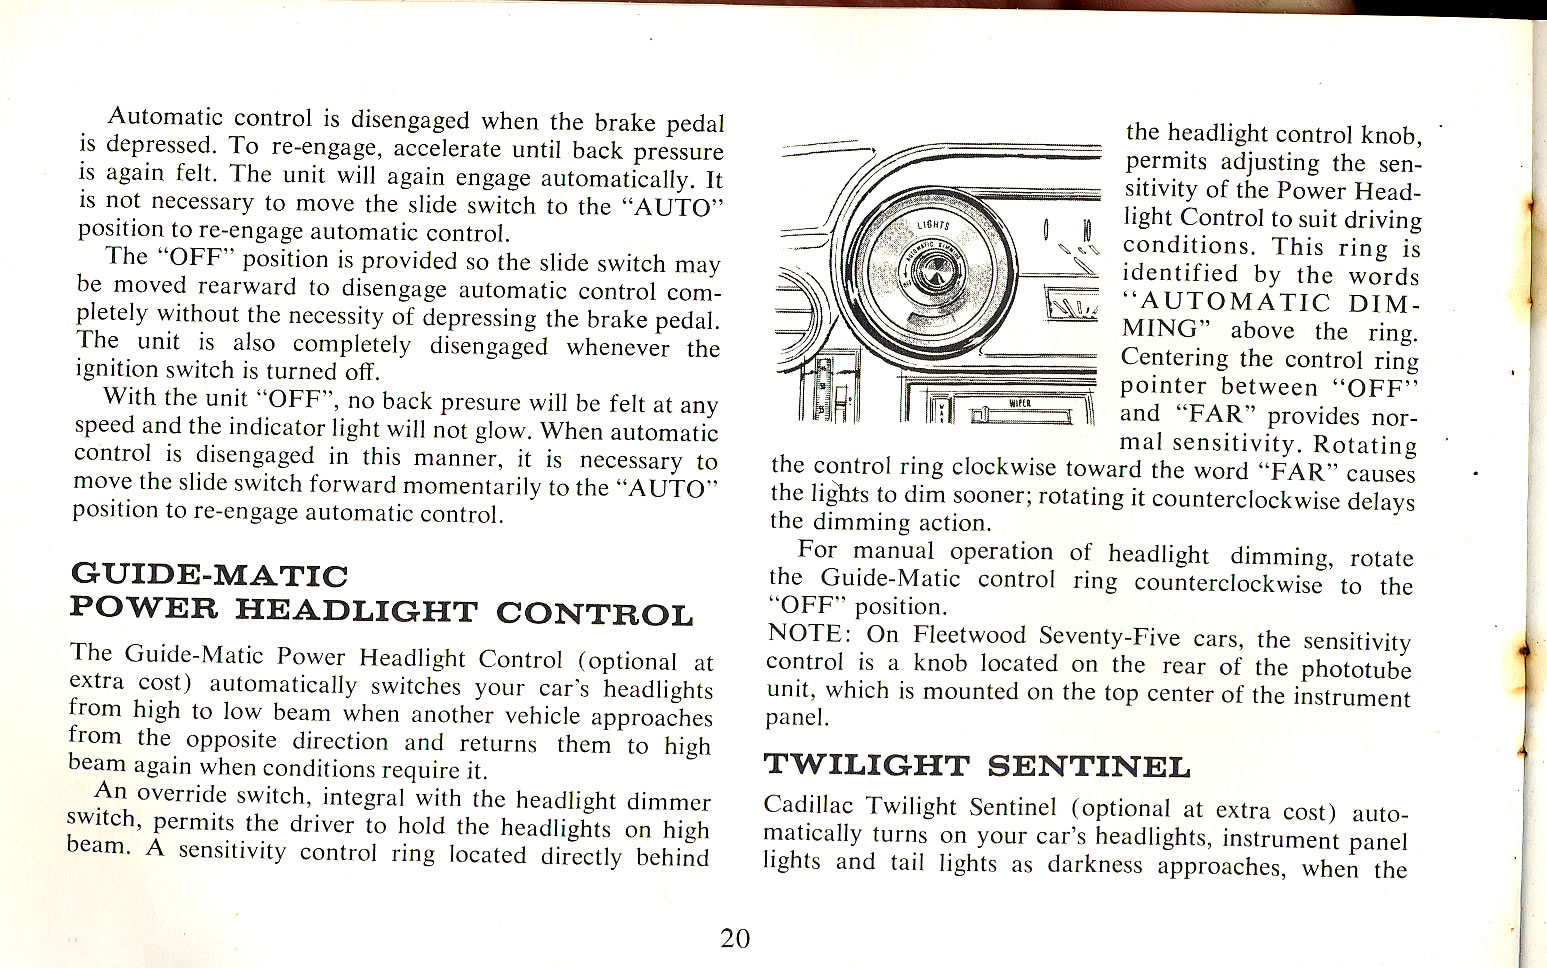 1965 Cadillac Owners Manual Page 18